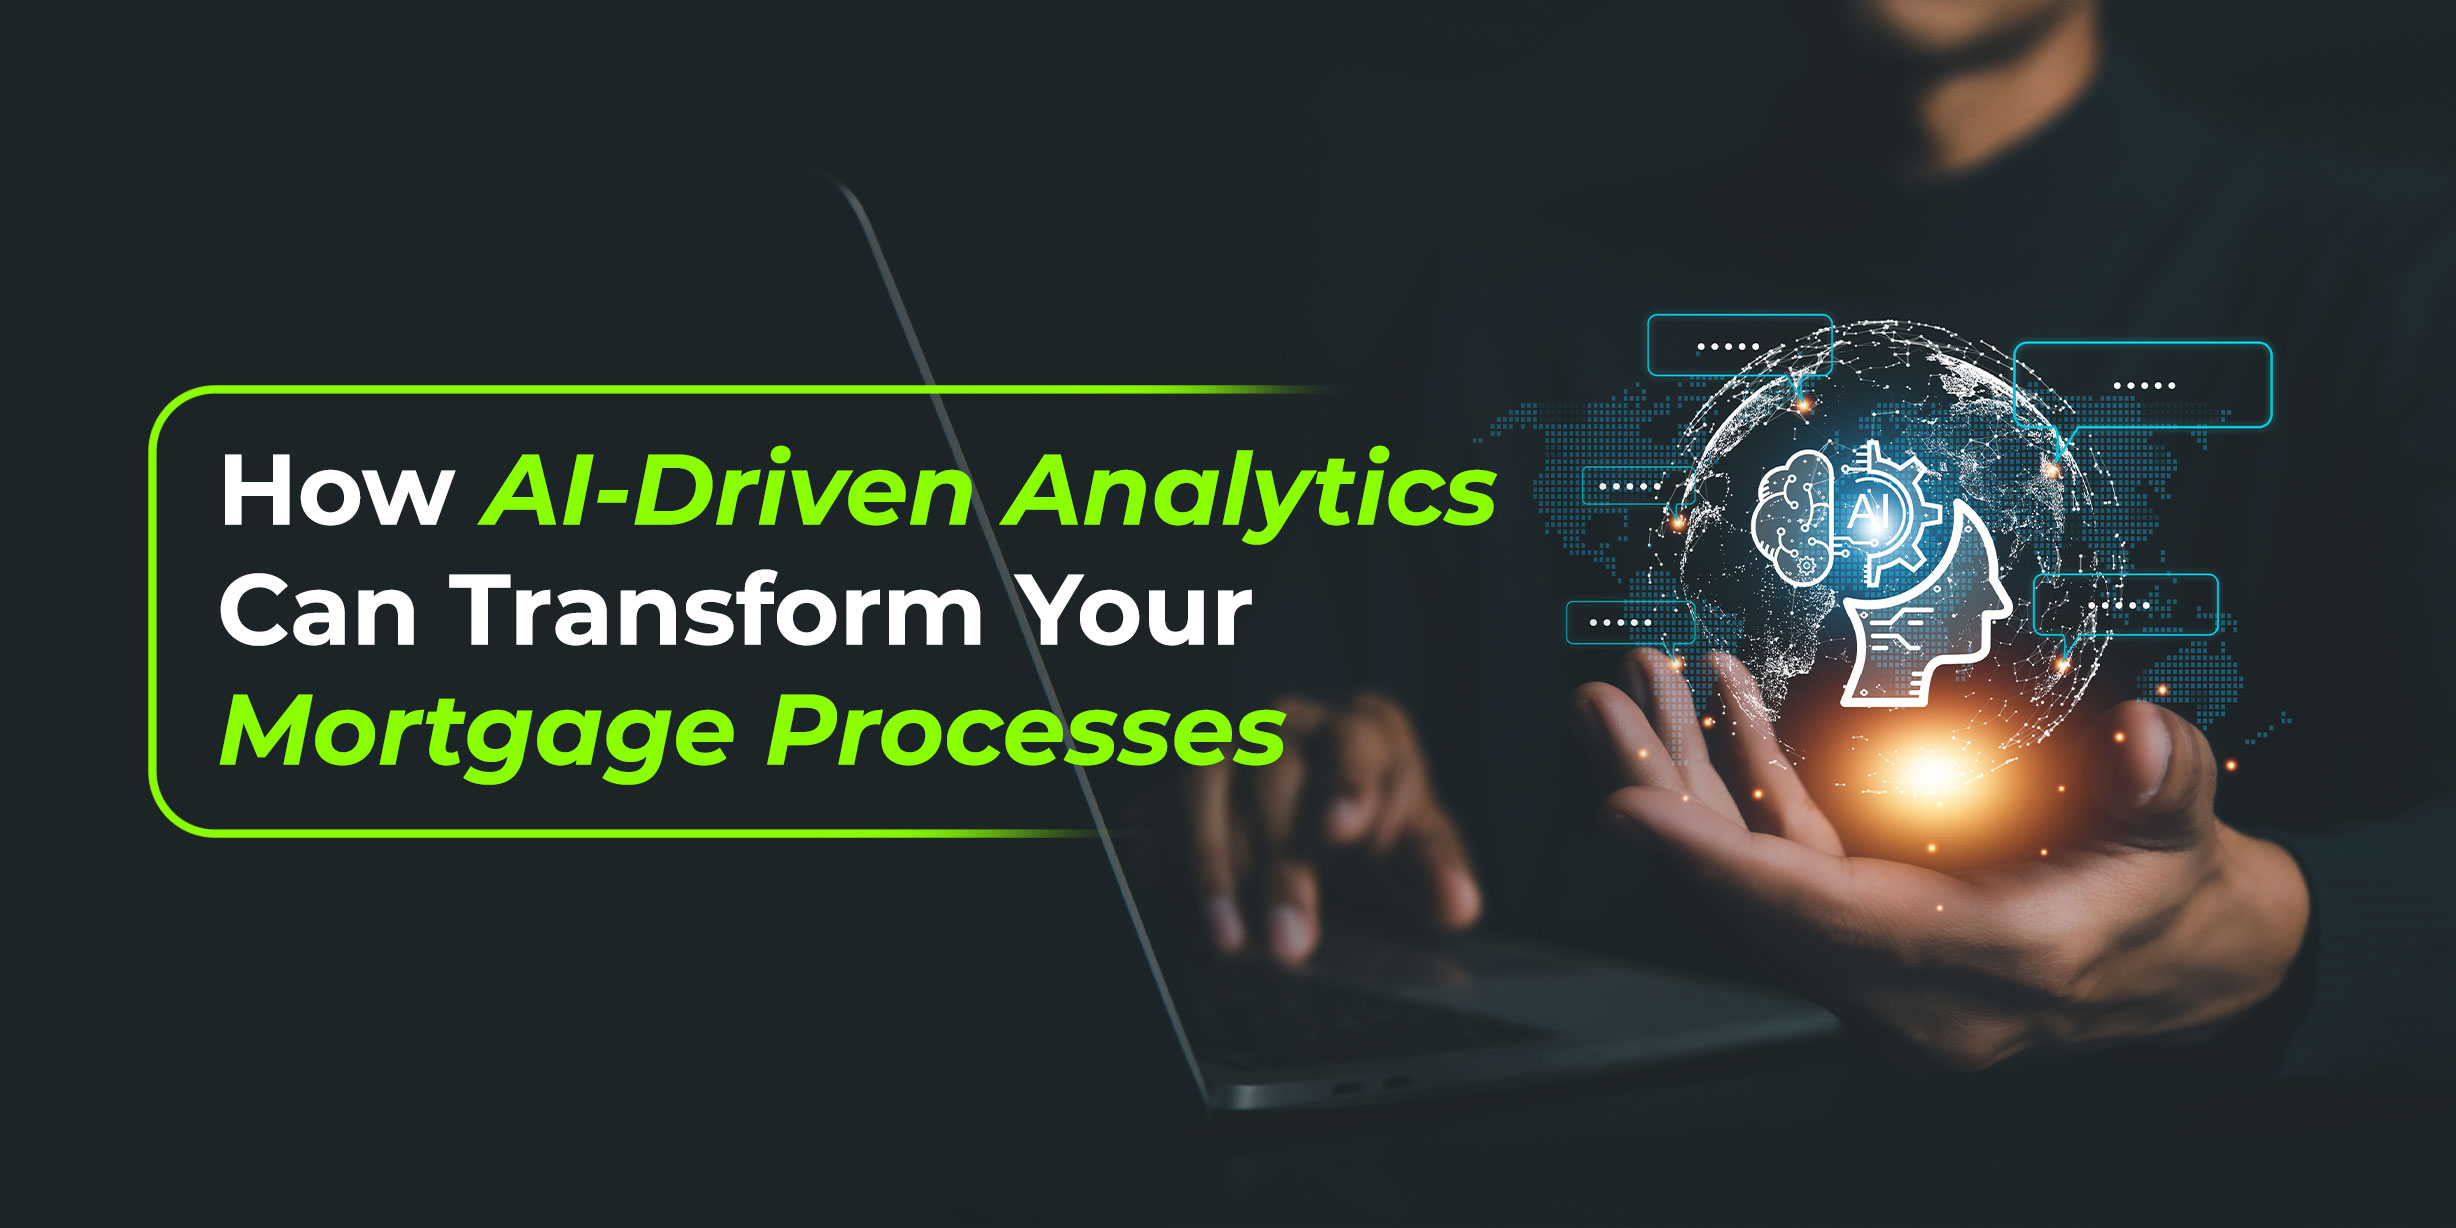 How AI-Driven Analytics Can Transform Your Mortgage Processes